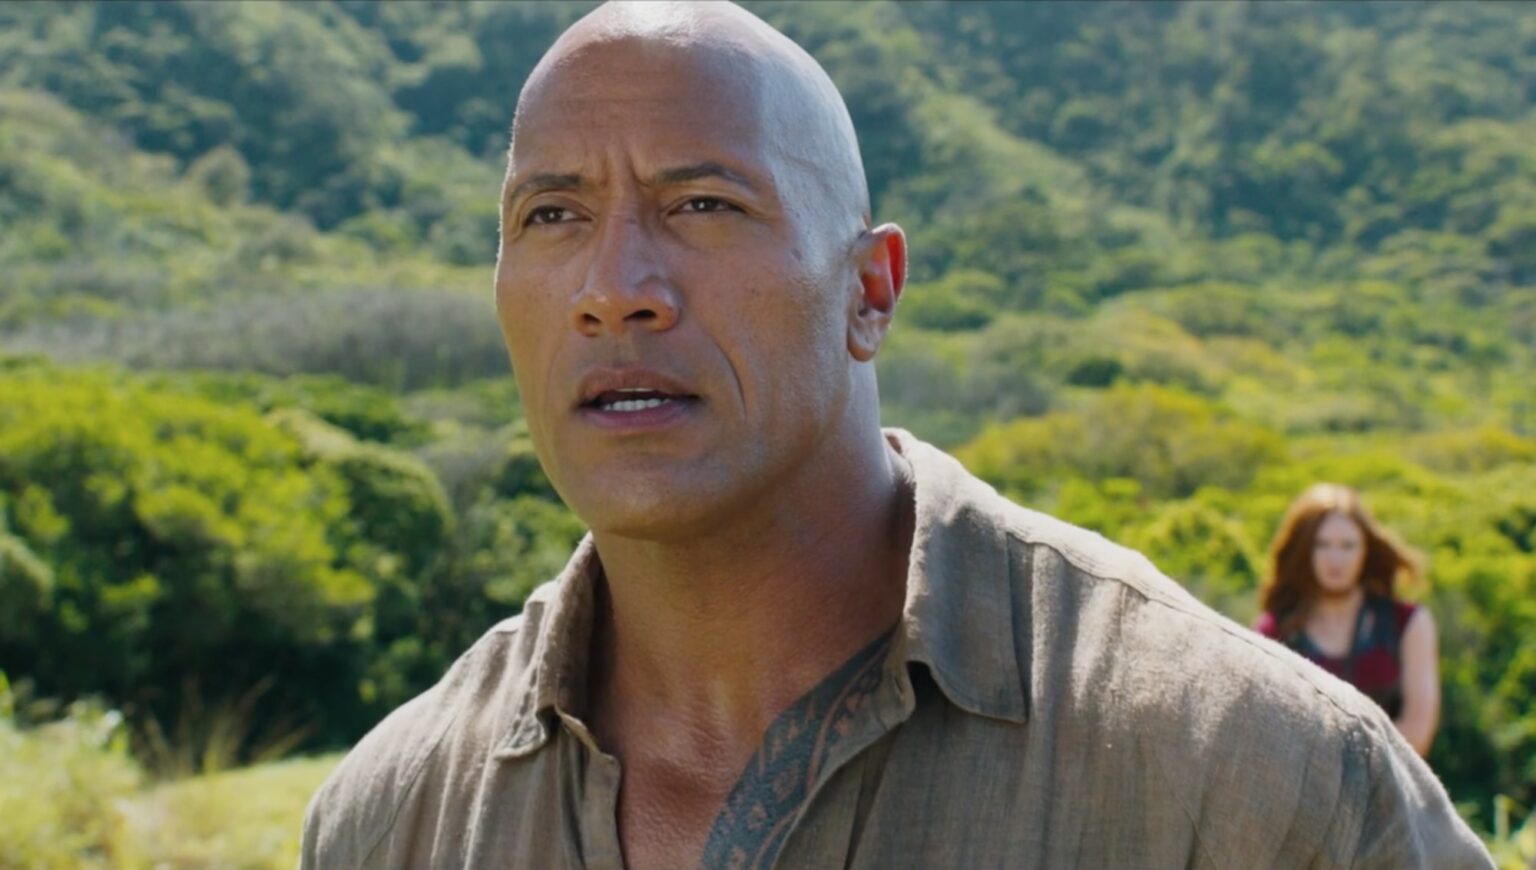 Are we in 'Jumanji'? Because Dwayne "The Rock" Johnson's net worth is out of this world! Check out why the rock is only getting richer over time.